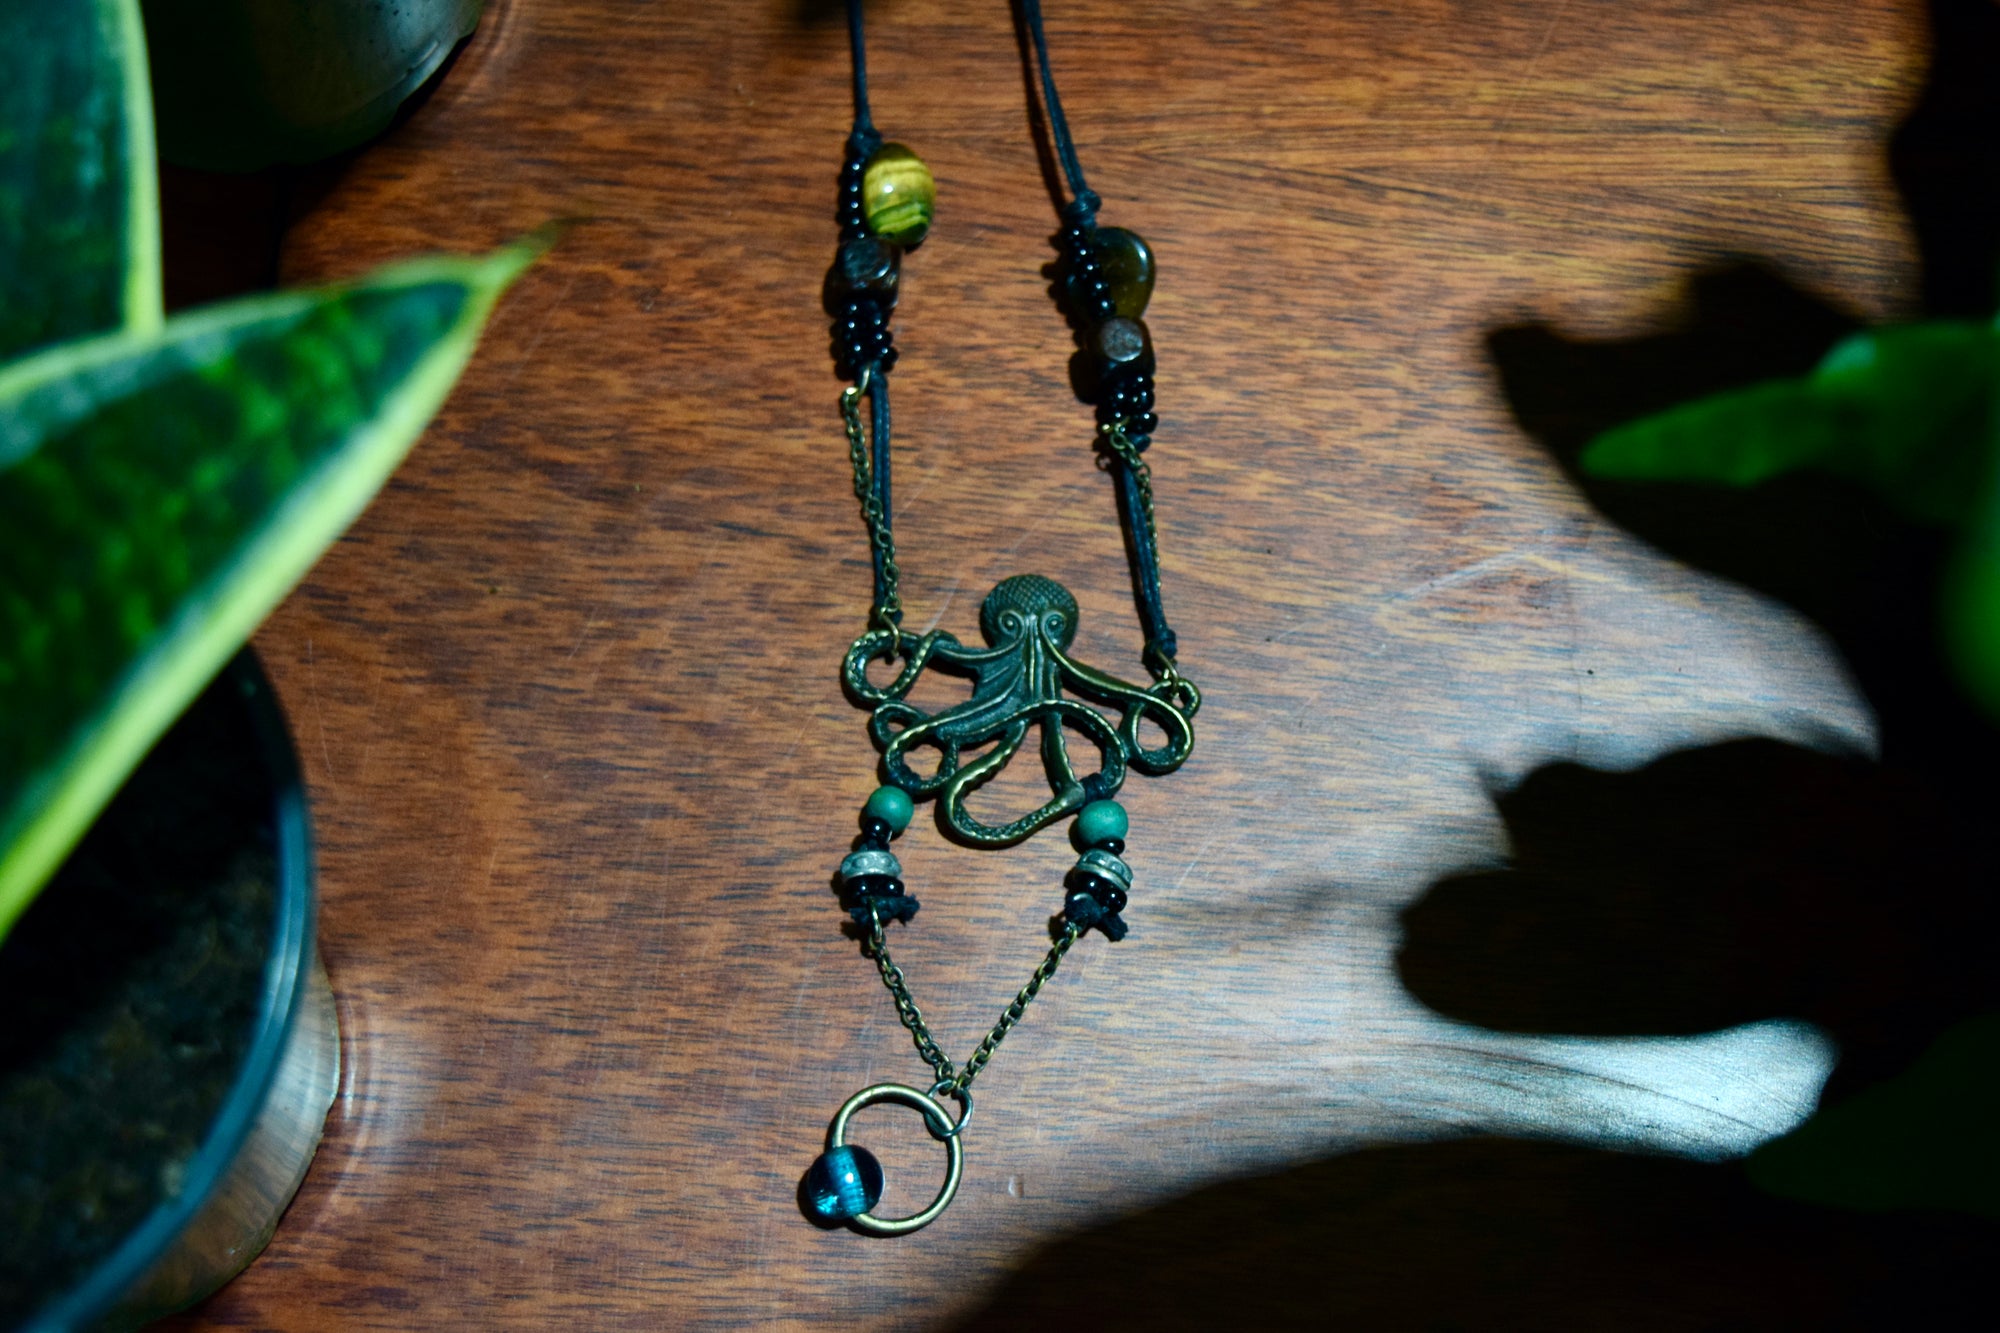 The octopus neckless on a dark wooden surface, surrounded by plants.